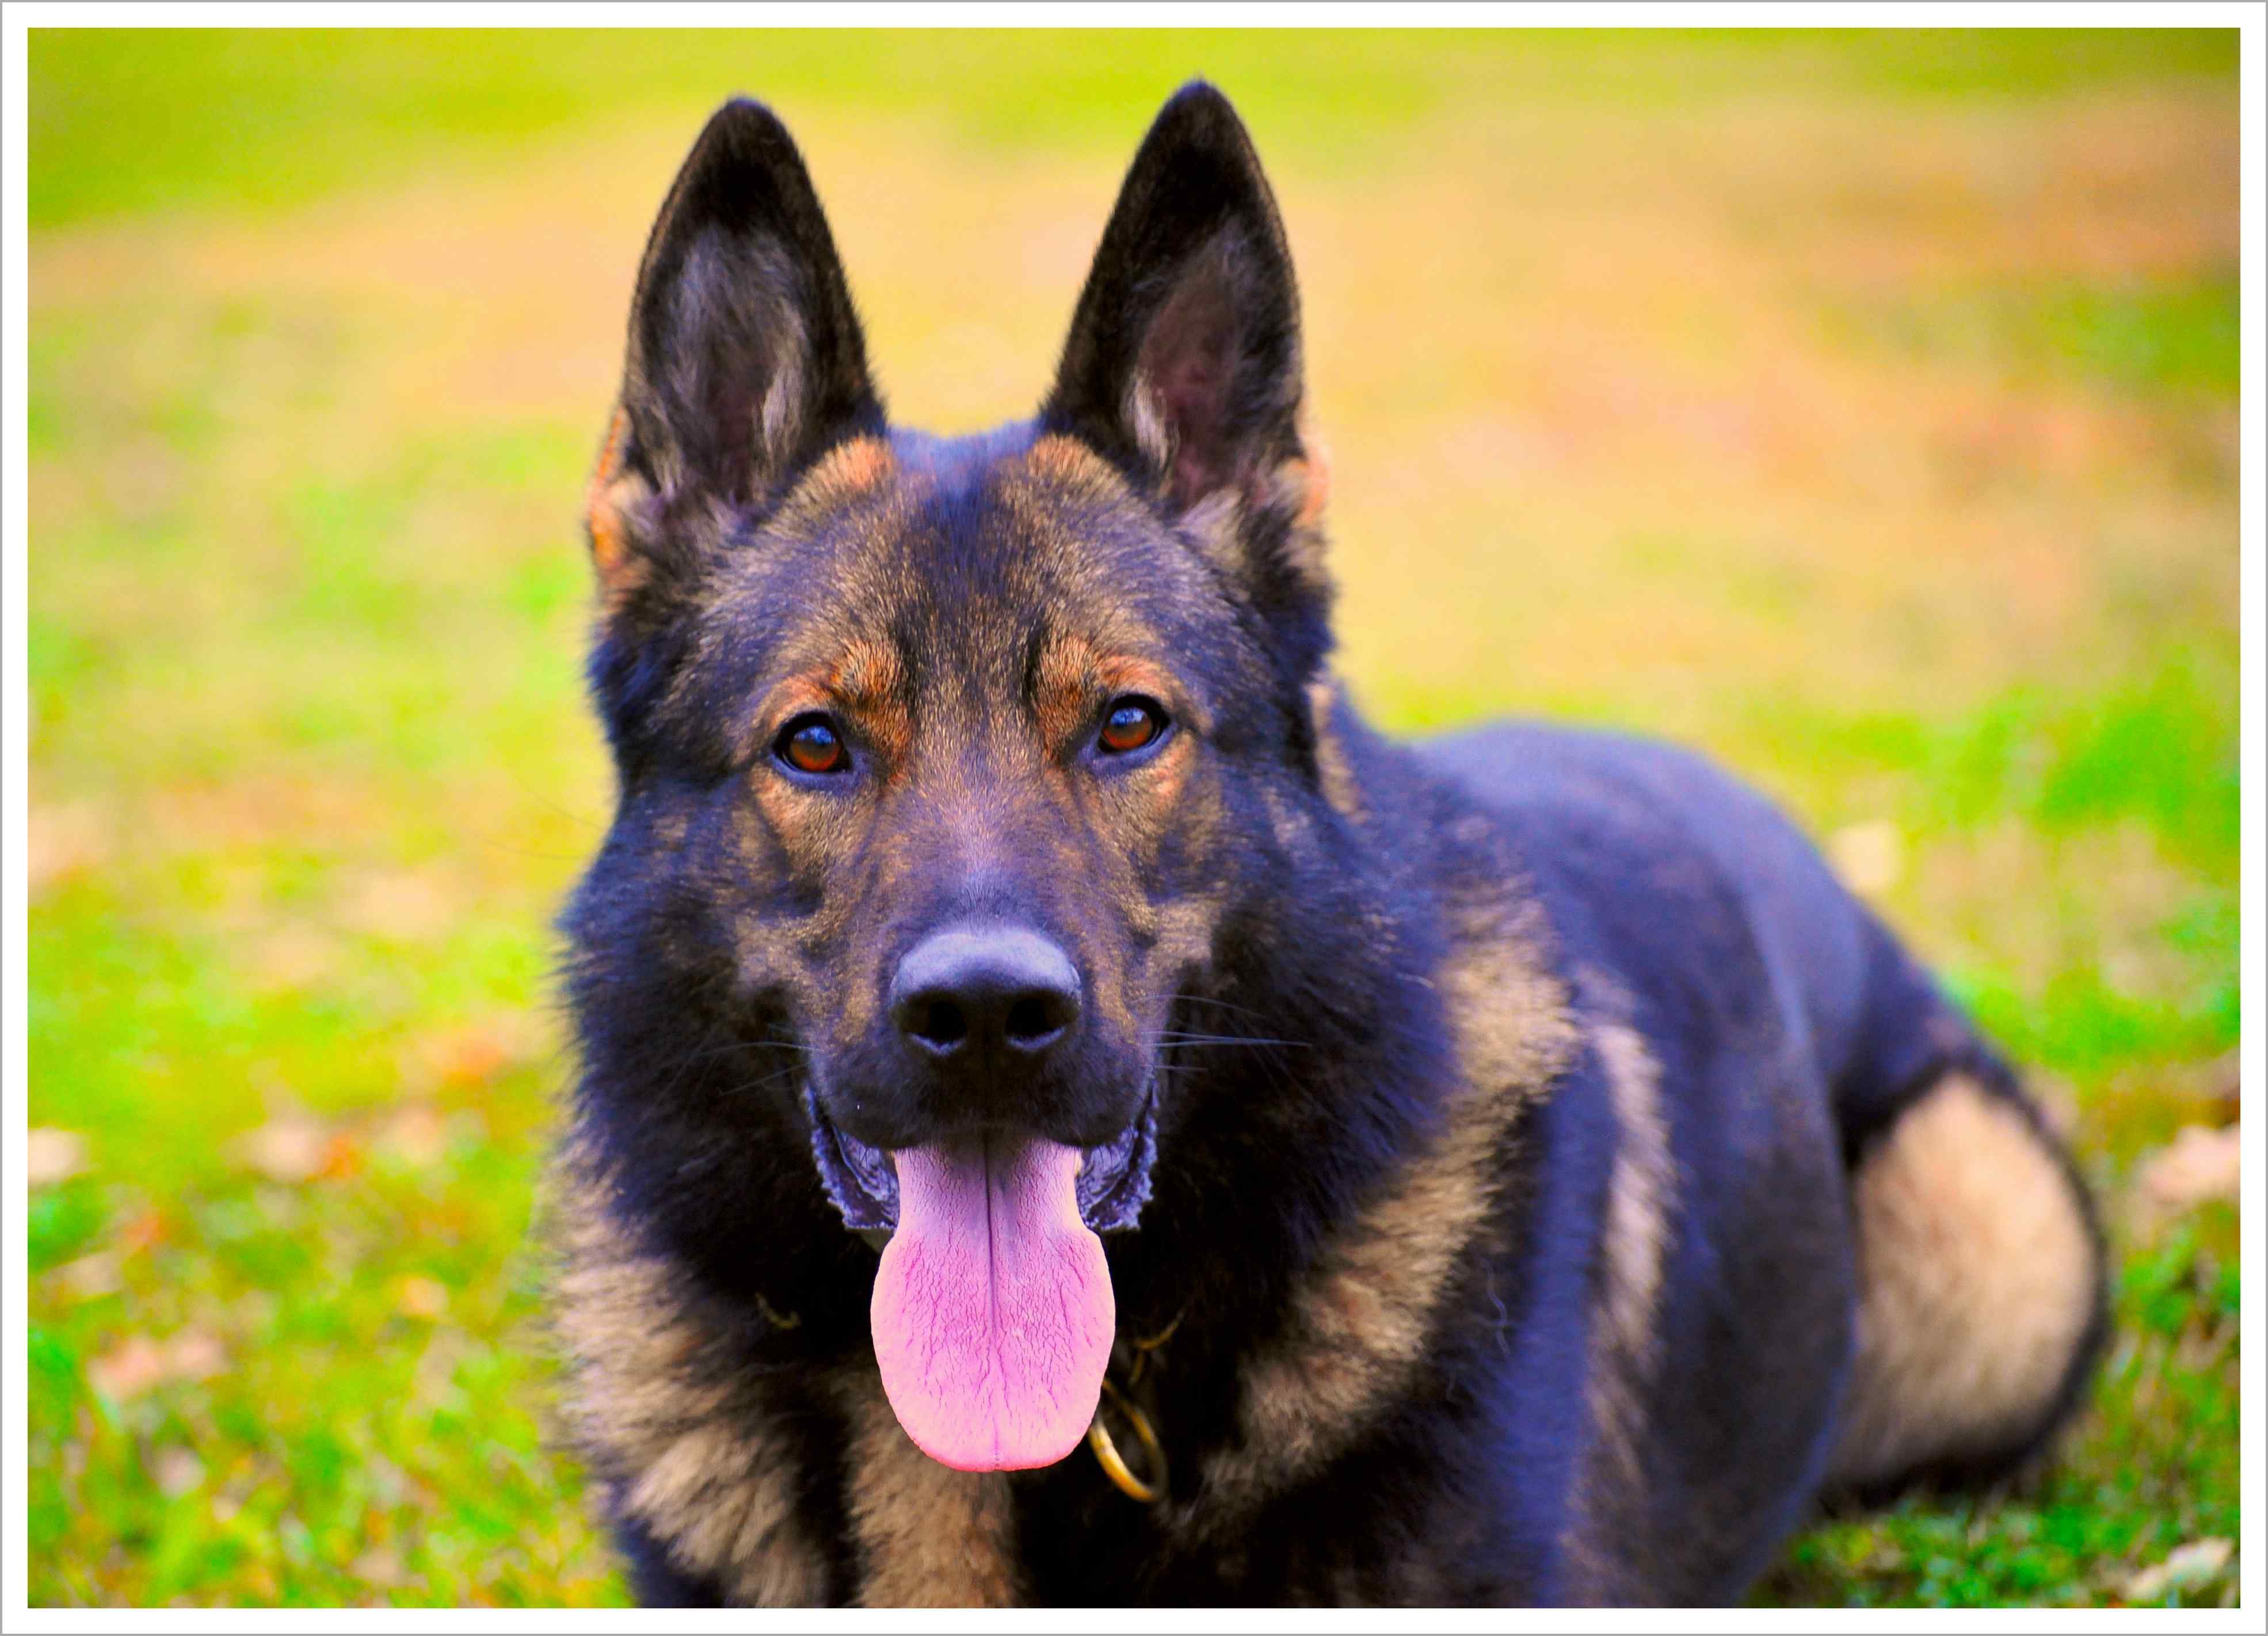 Family Protection Dogs for Sale Security Guards Companies